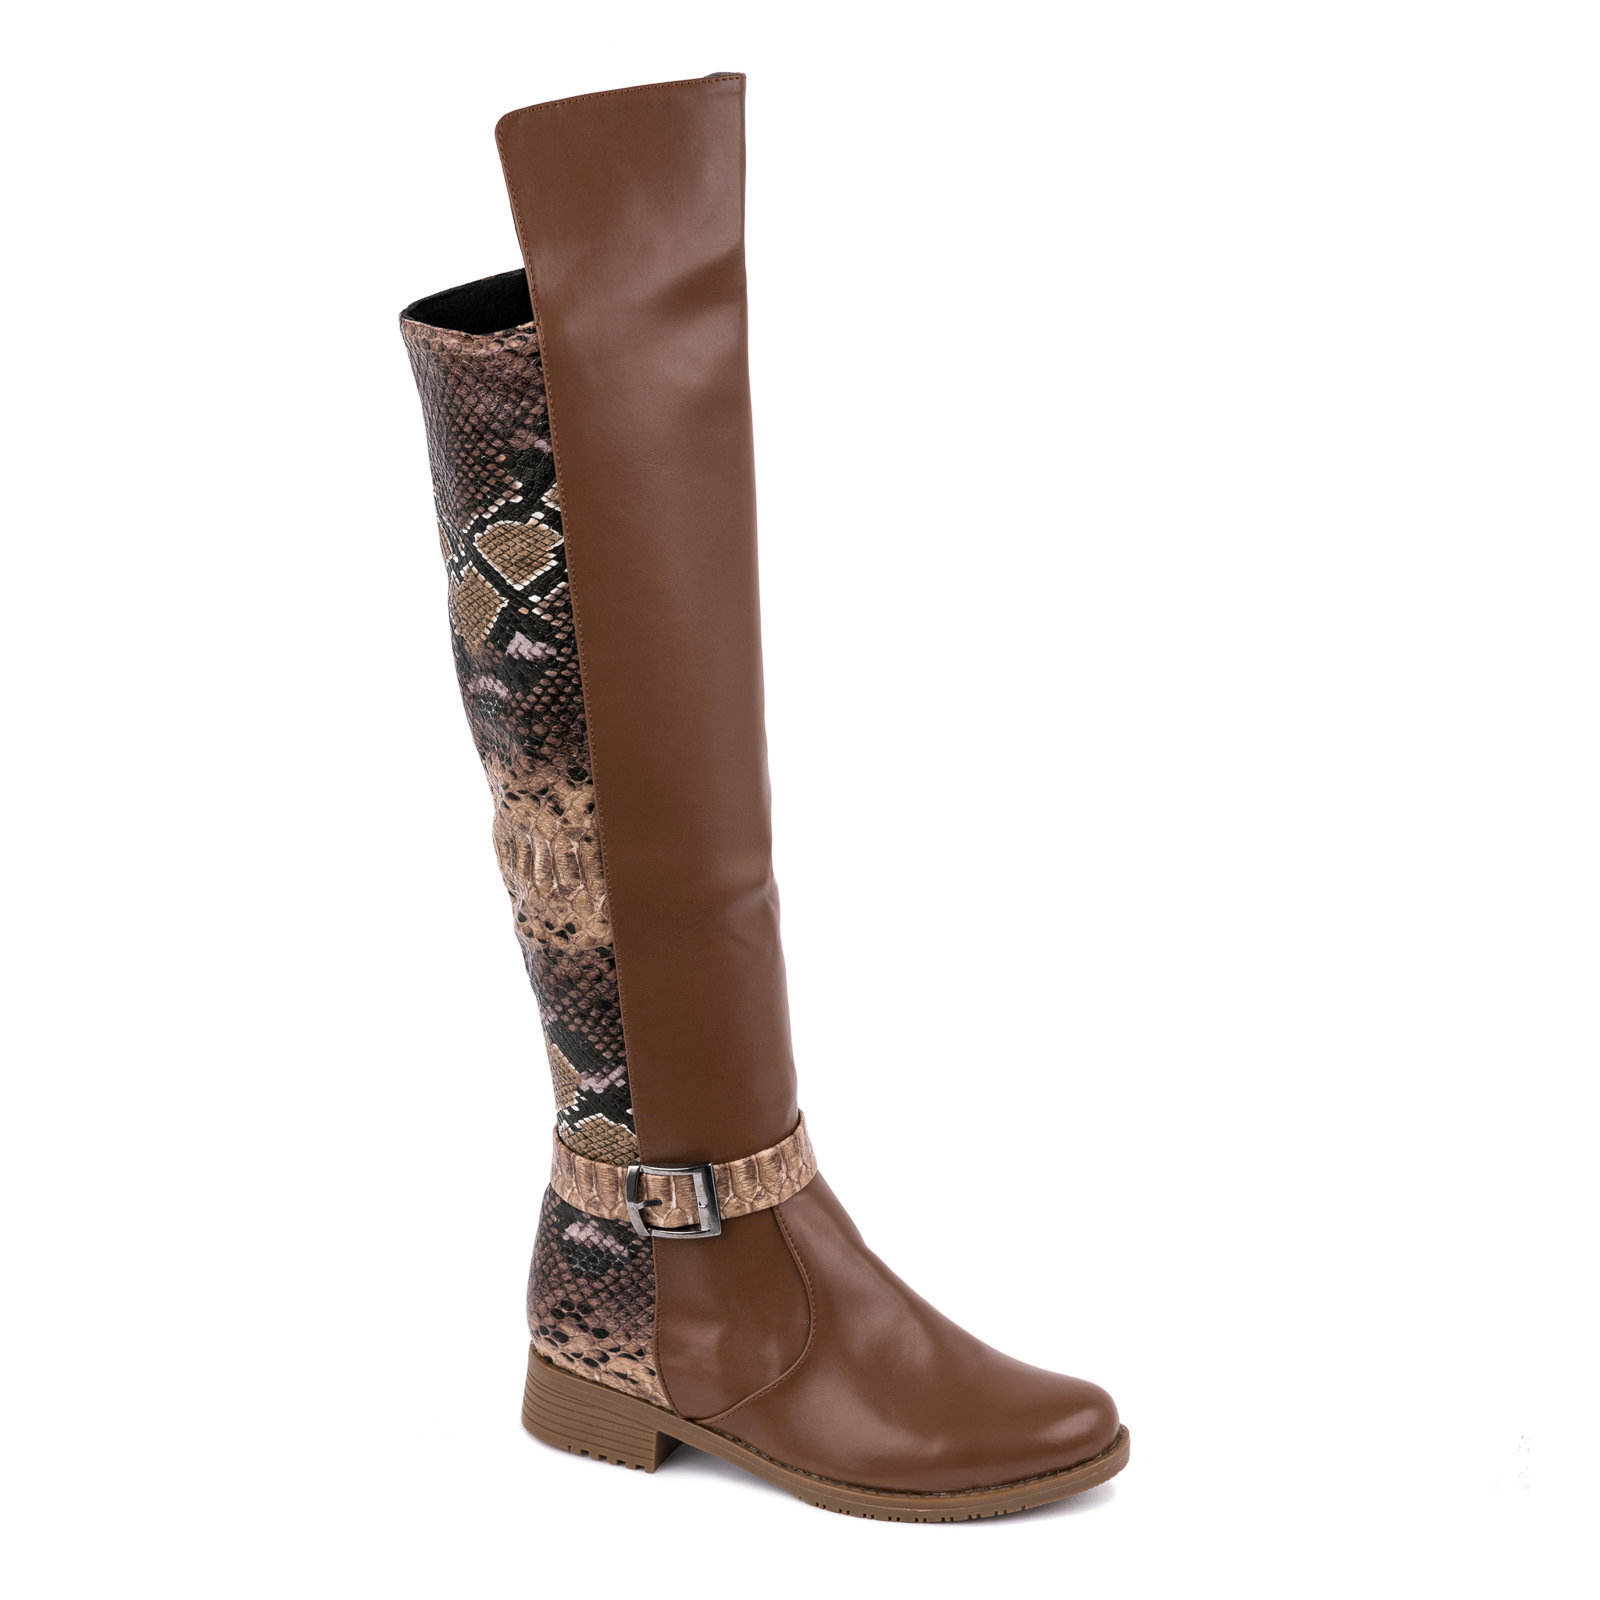 SNAKE PRINT HIGH BOOTS WITH BELTS - CAMEL